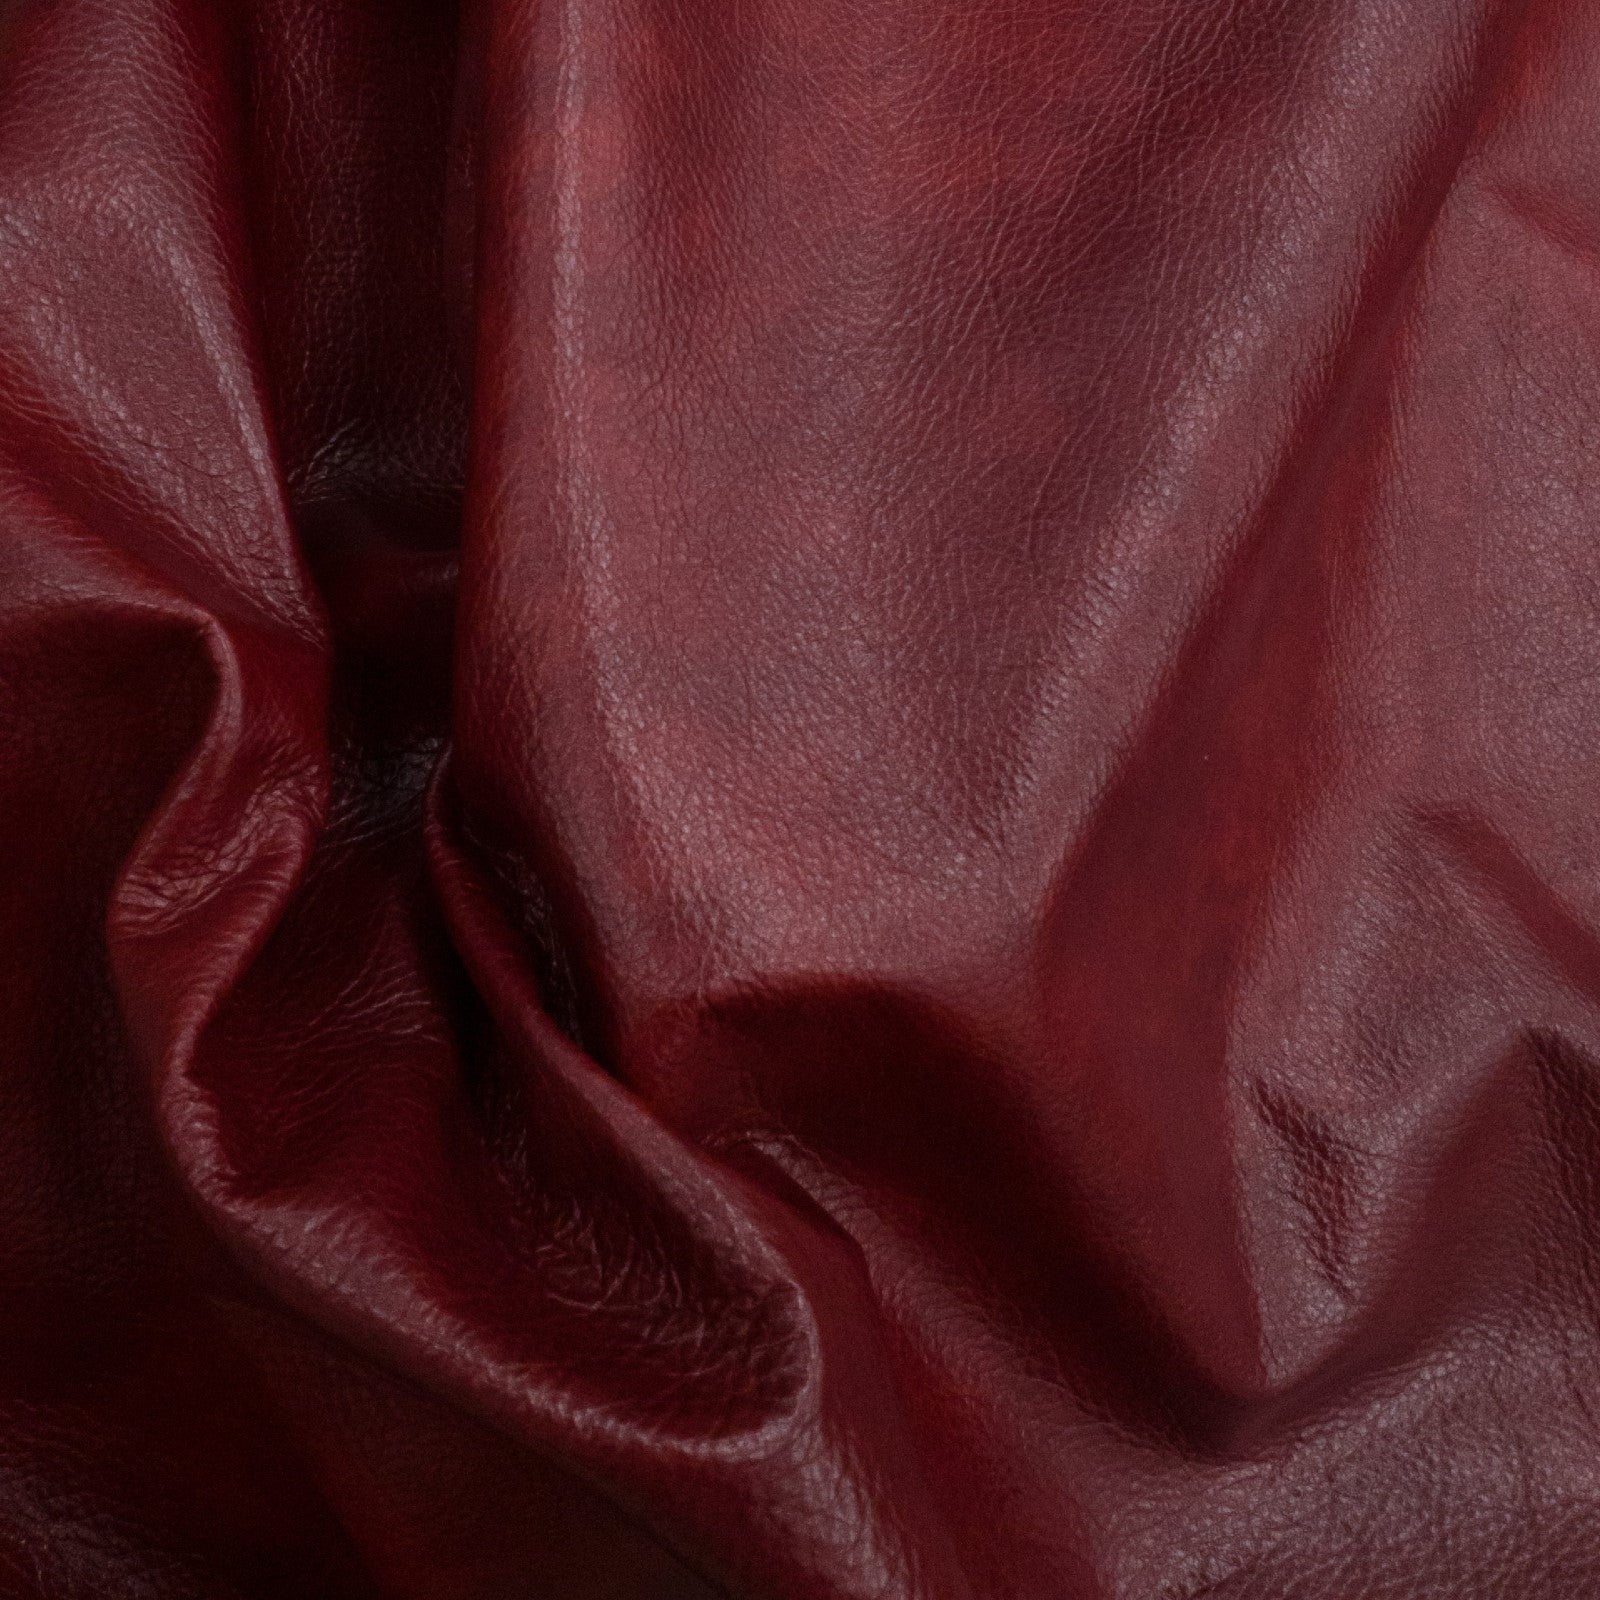 Red, 2-4 oz, 33-64 SqFt, Full Upholstery Cow Hides, Rustic Ruby / 41-48 / 2-3 | The Leather Guy